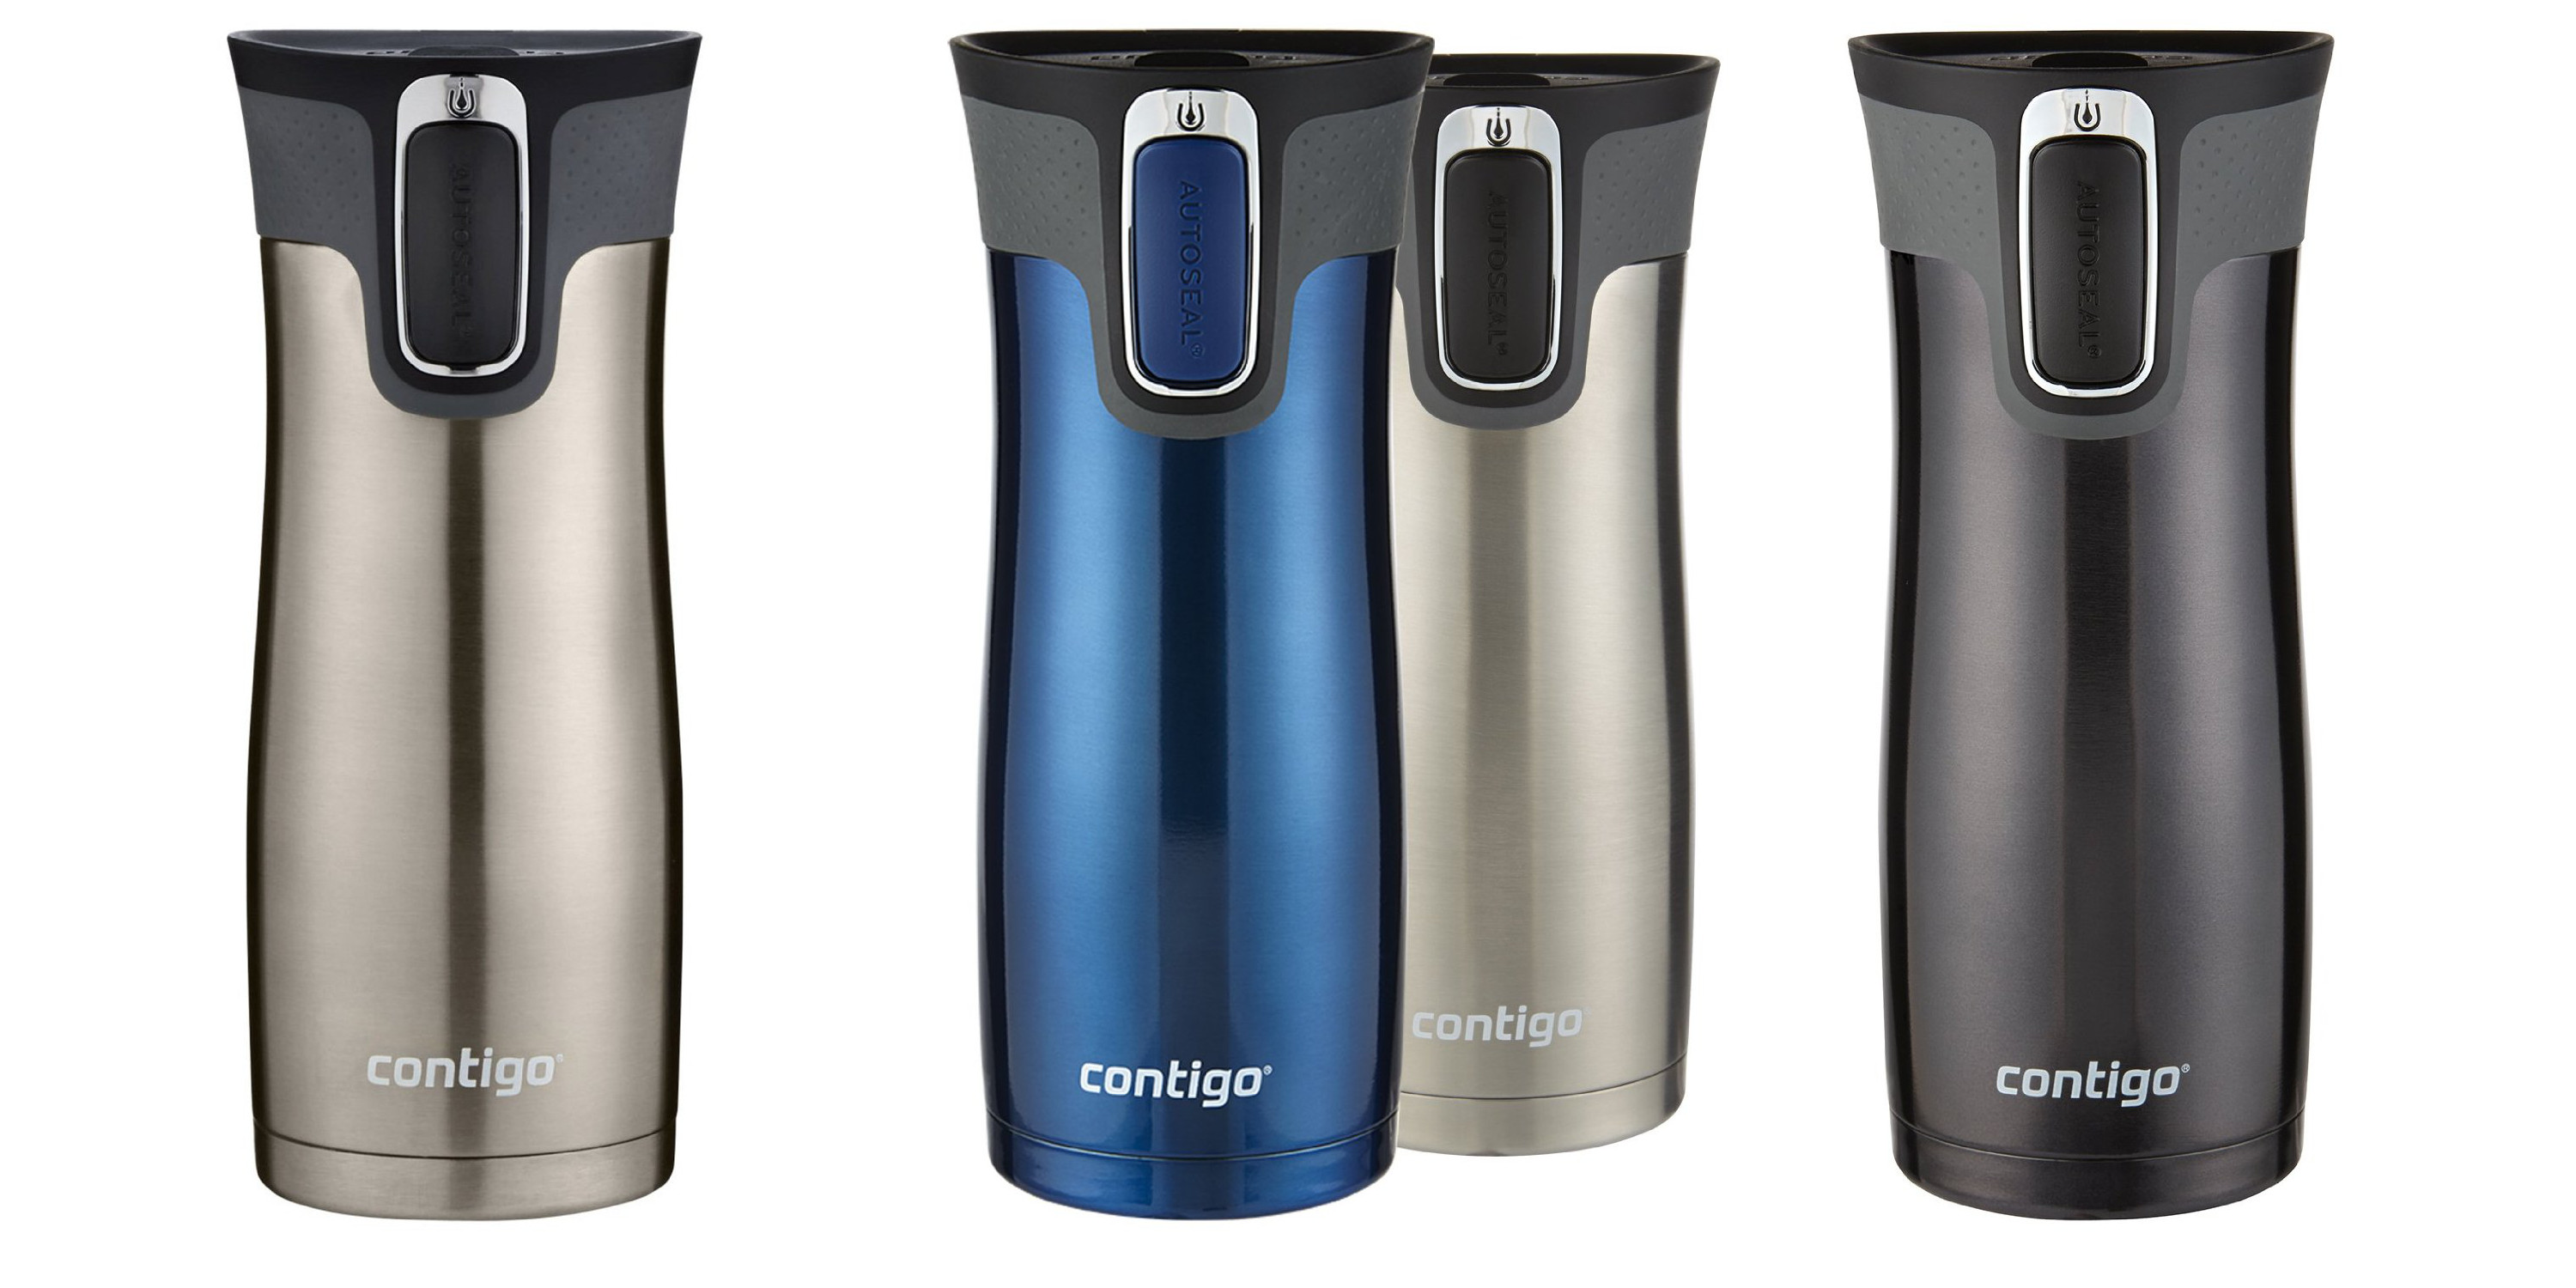 https://9to5toys.com/wp-content/uploads/sites/5/2016/06/contigo_s-autoseal-west-loop-stainless-steel-travel-mug-with-easy-clean-lid.jpg